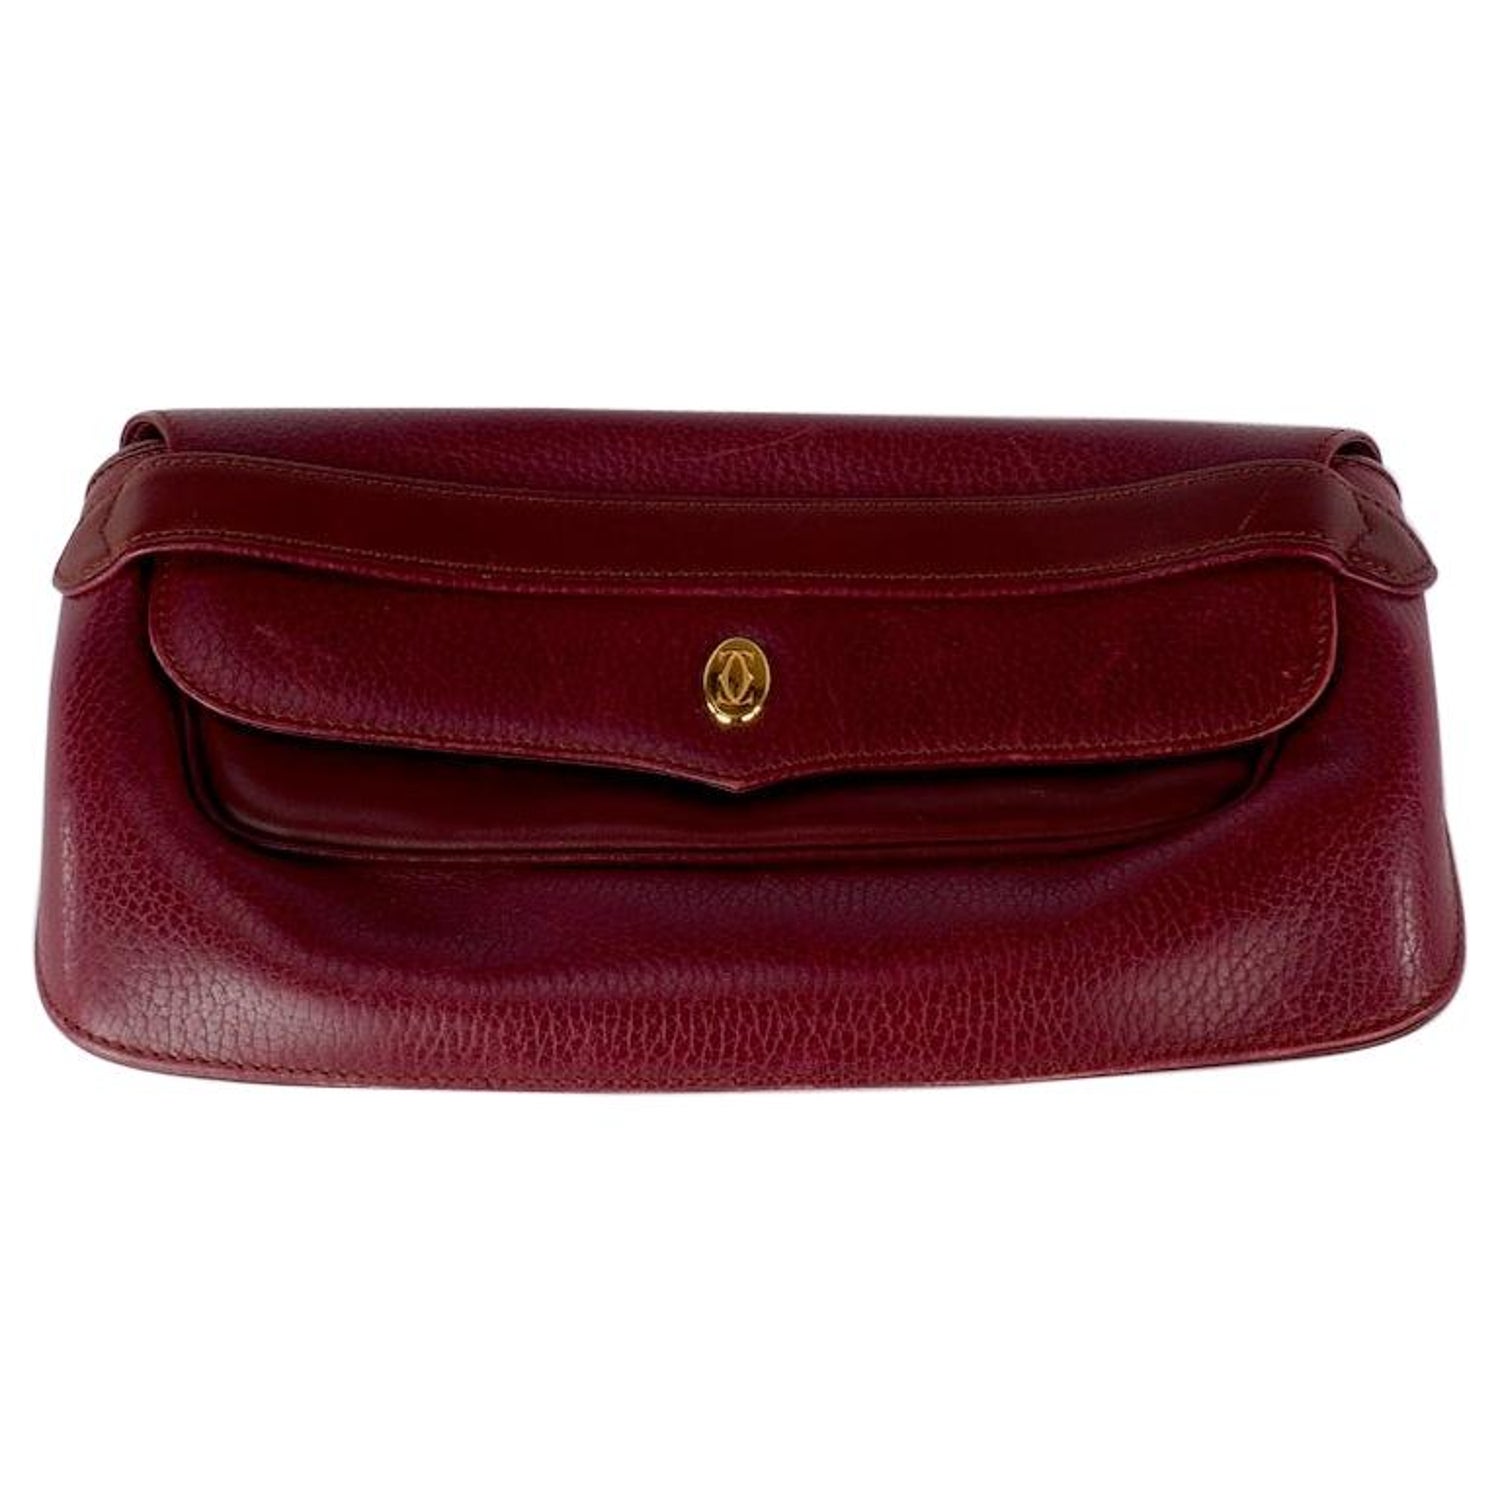 Red Cartier Bag - 4 For Sale on 1stDibs